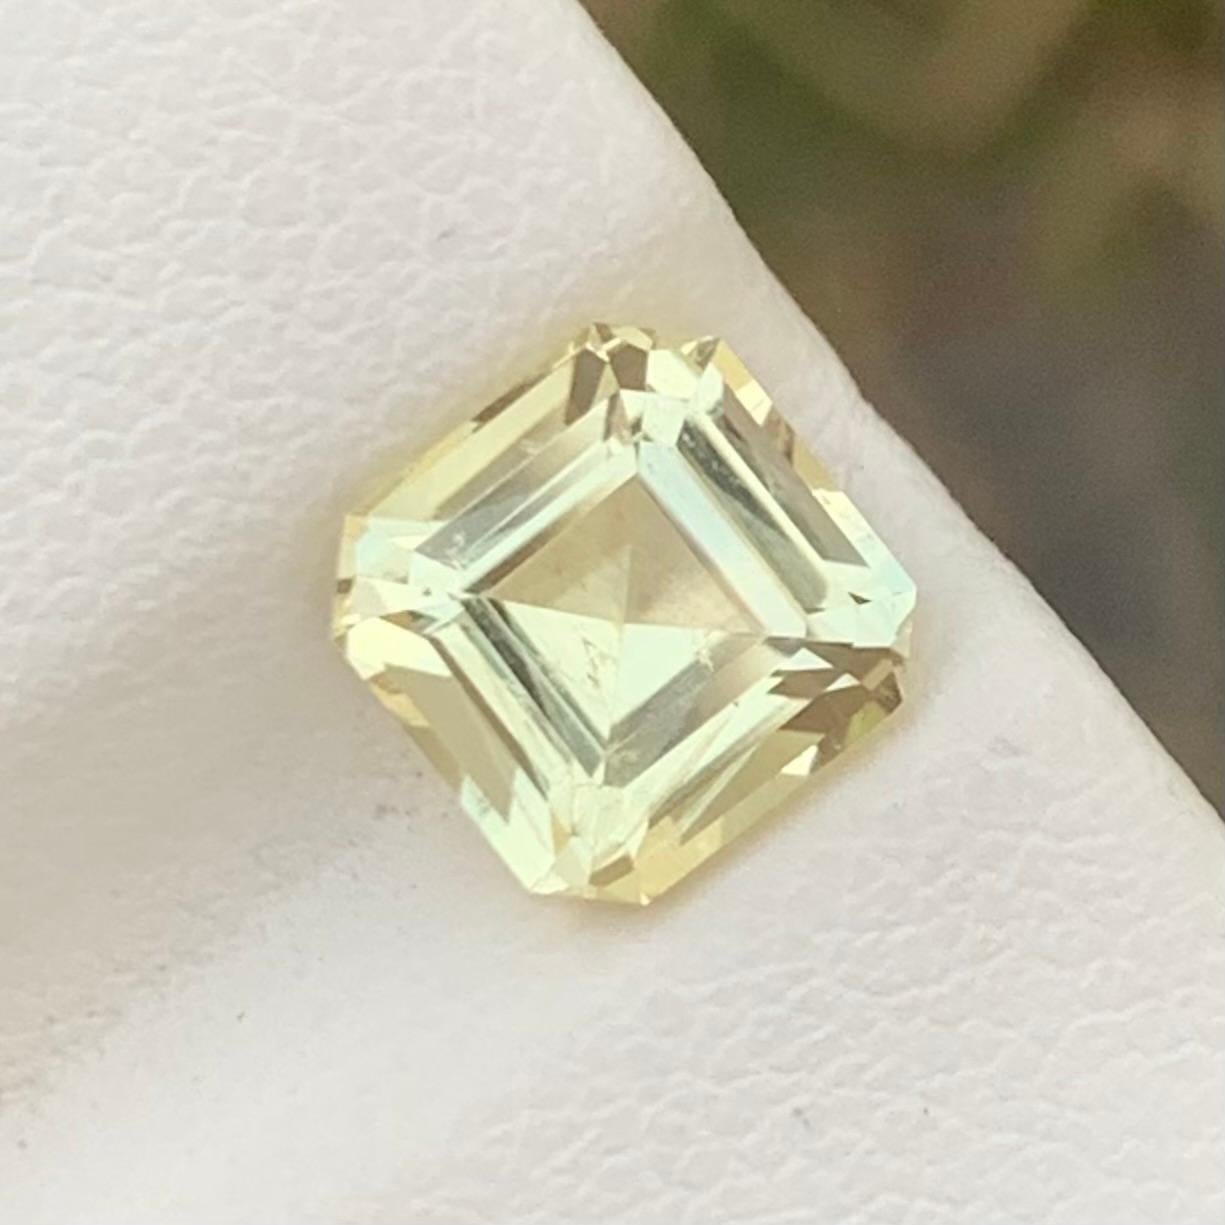 Loose Heliodor 
Weight: 1.80 Carat 
Dimension: 7.3 x 7.3 x 5.3 Mm 
Origin: Brazil 
Shape: Square 
Cut : Asscher 
Certificate: On Demand 

Heliodor, a captivating member of the beryl mineral family, is renowned for its radiant golden to yellow hues.